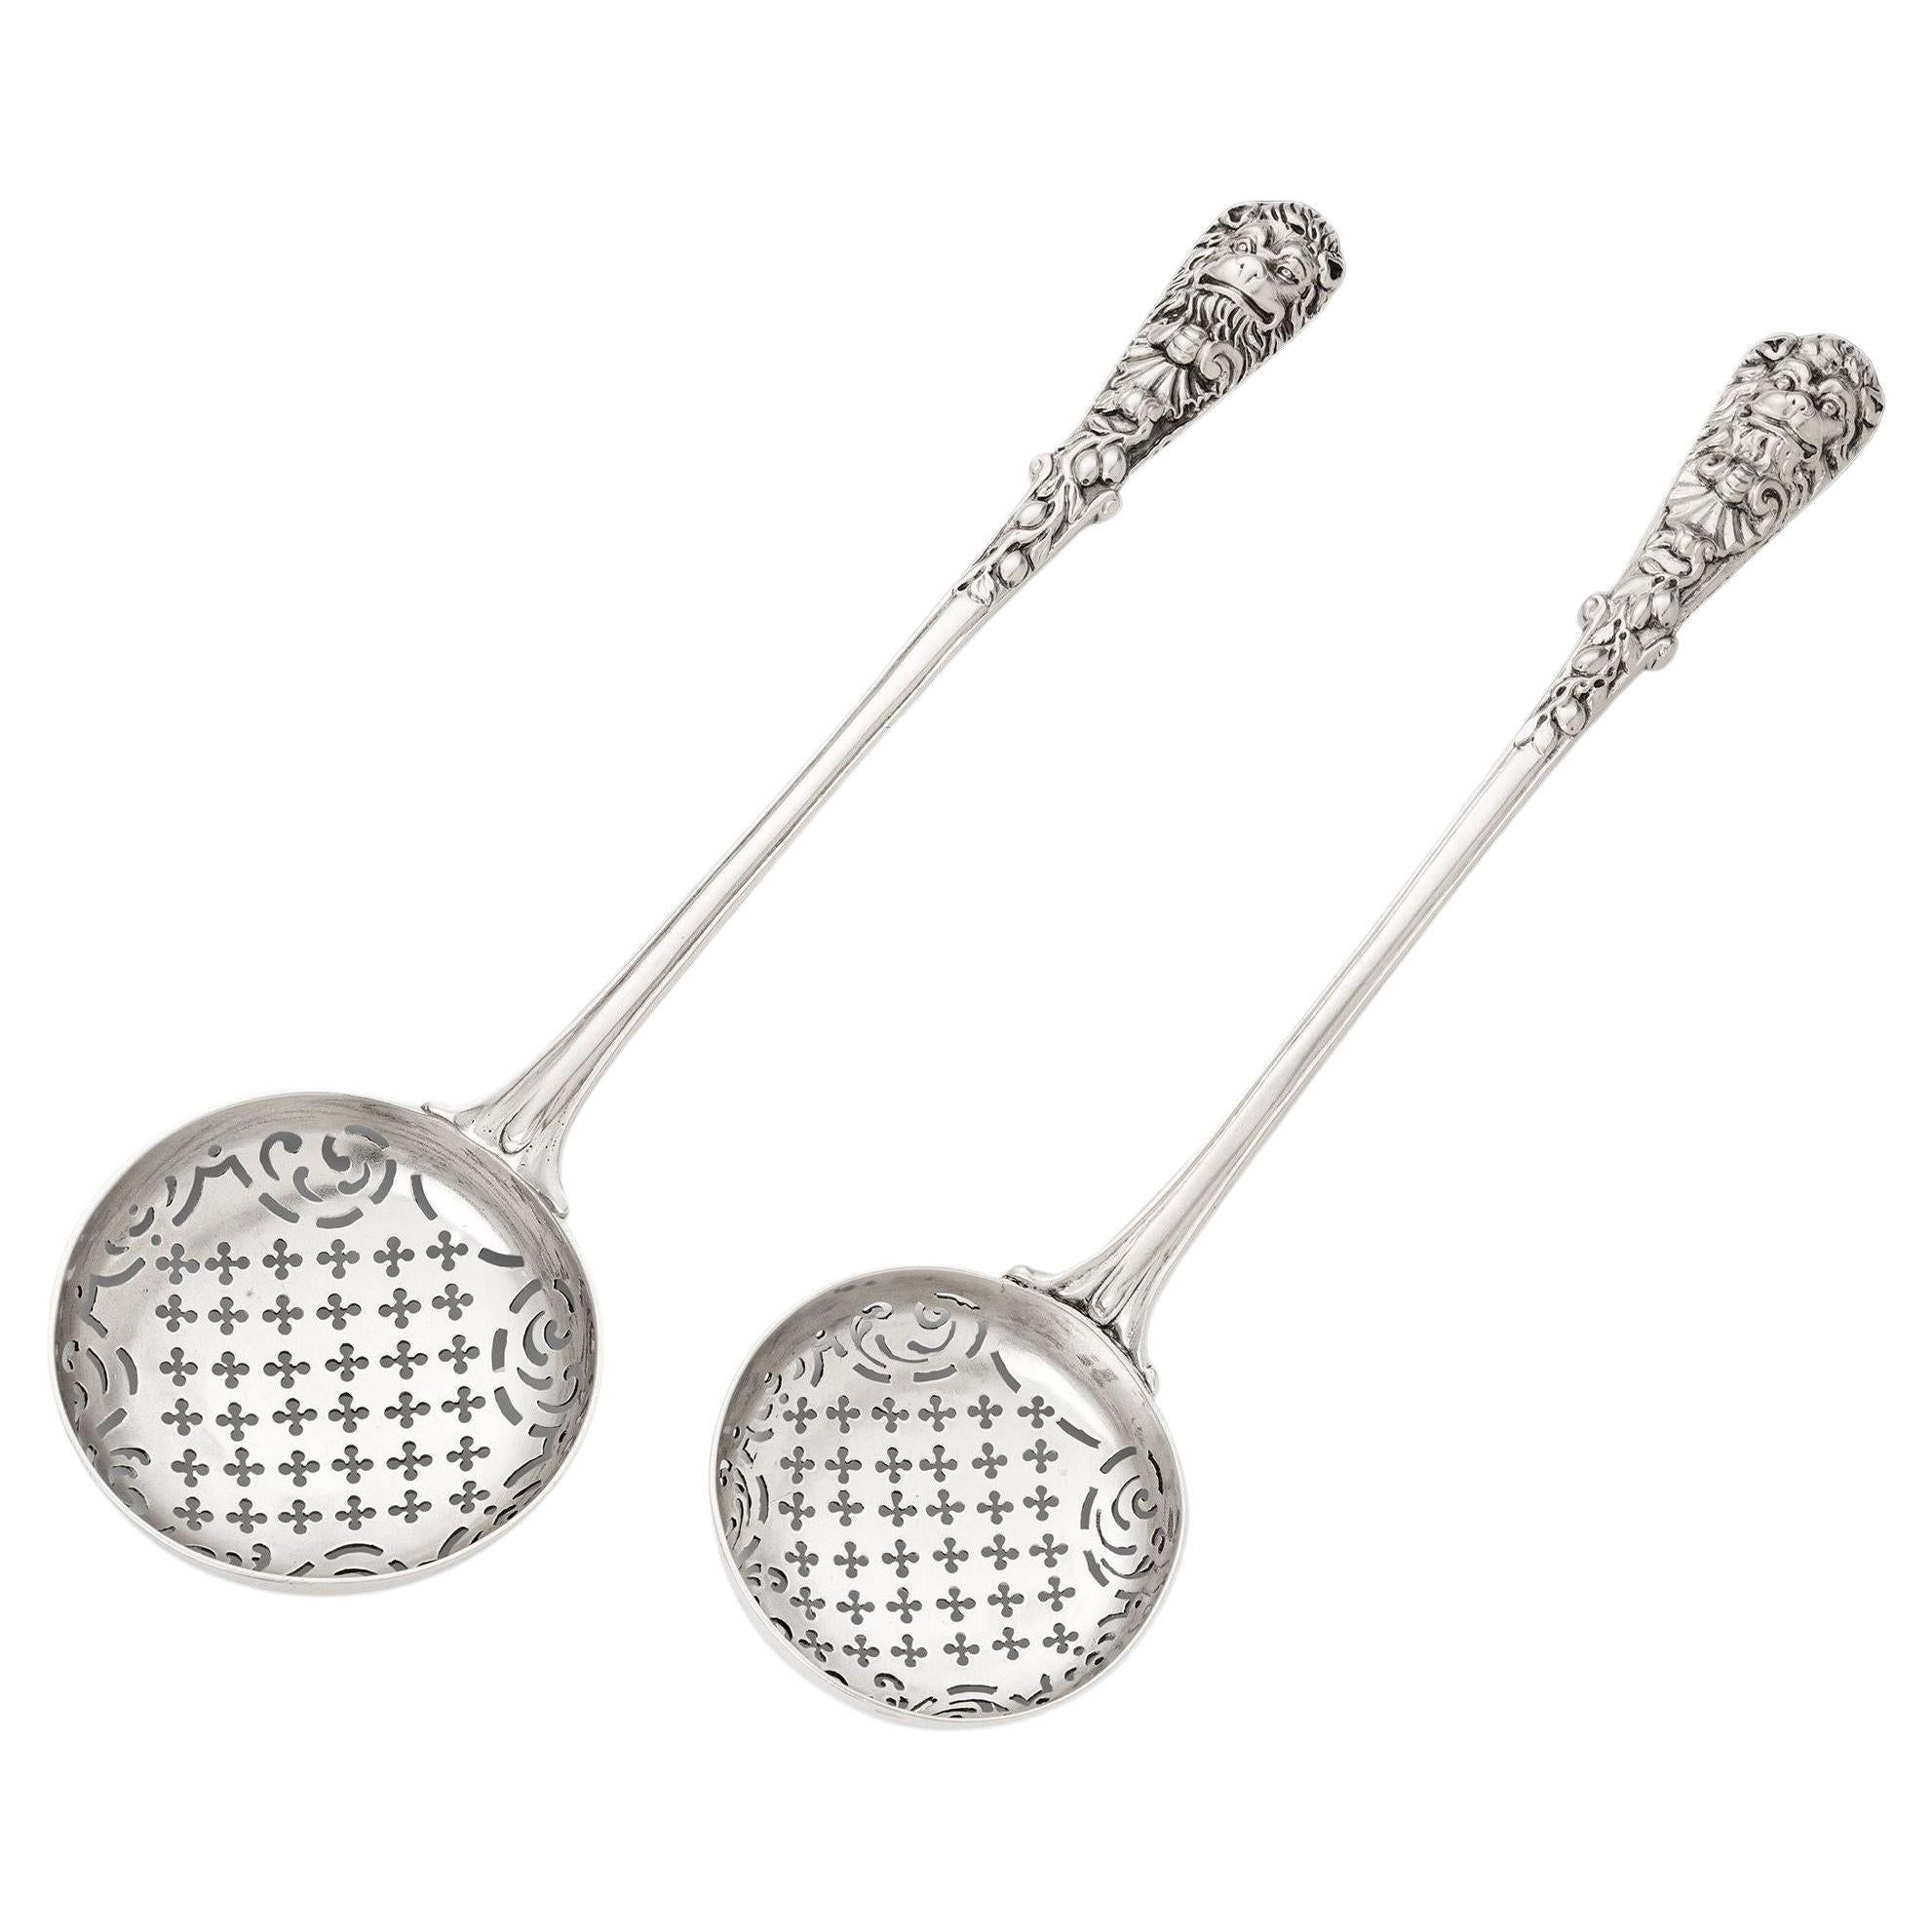 A pair of George II Cast Sifter Spoons, London, 1754/55 by William Cripps.